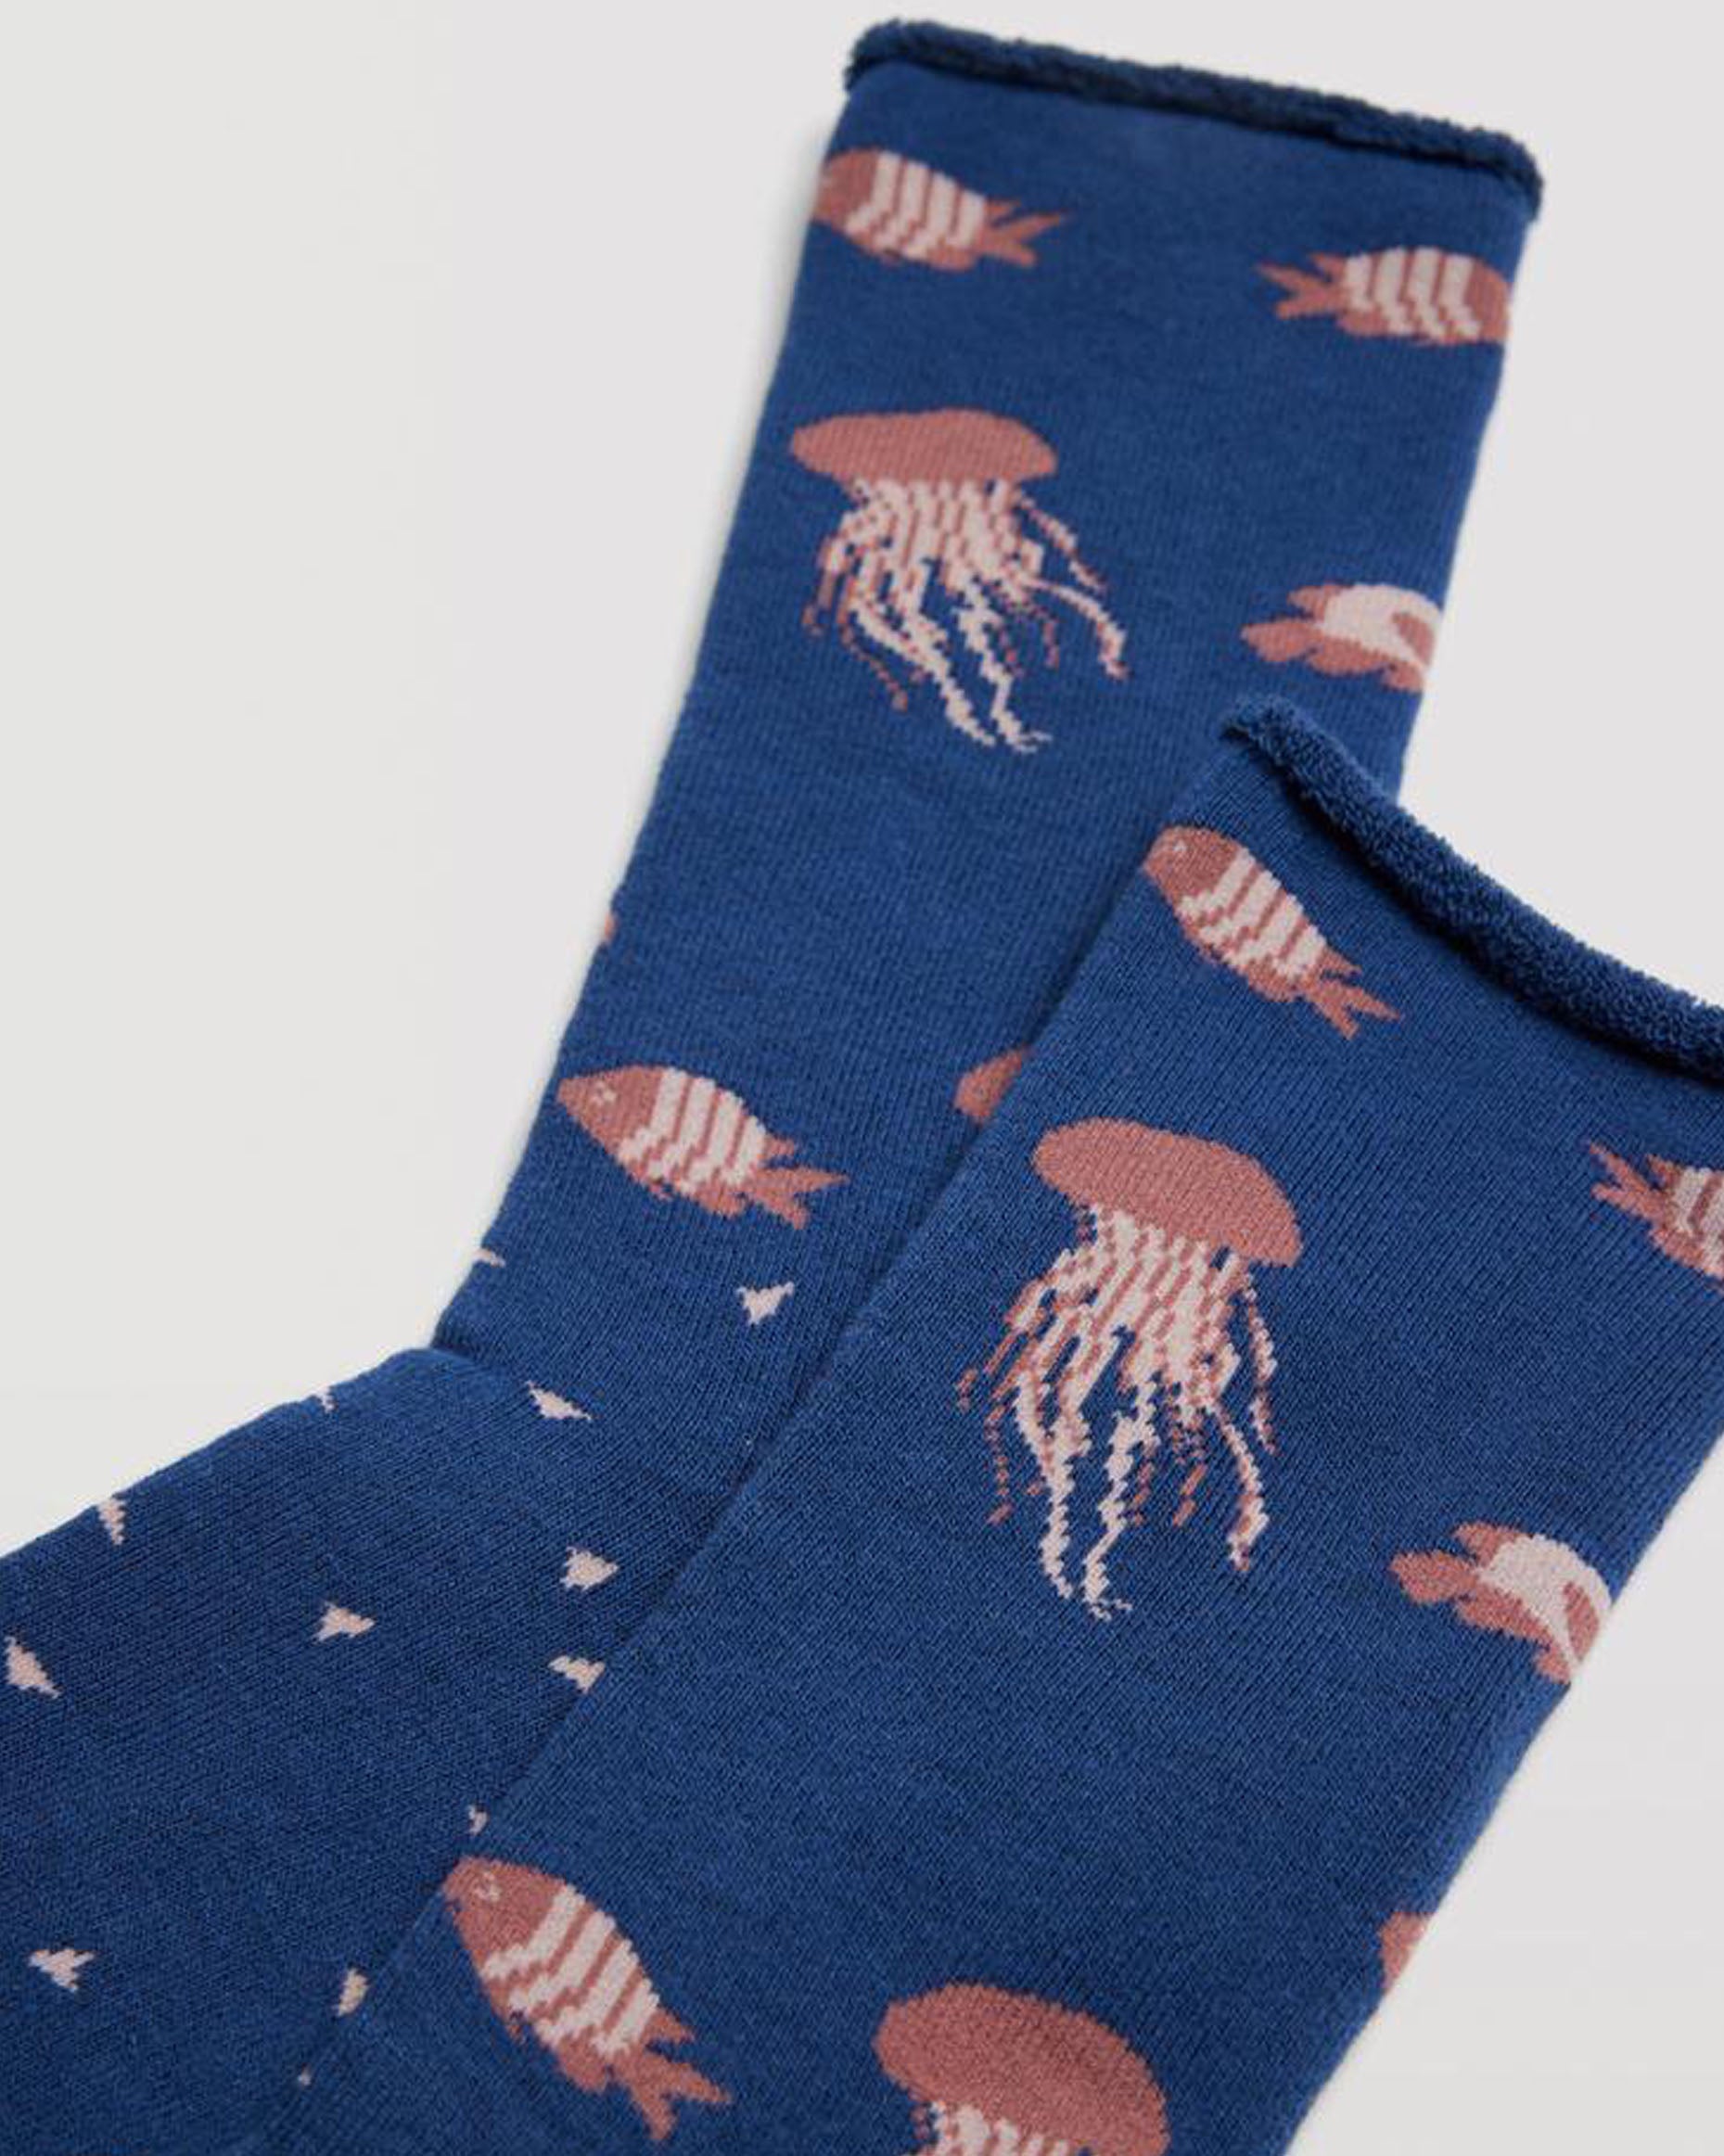 Ysabel Mora 12886 Jellyfish Sock - Terry lined navy blue cotton thermal socks with a sea creatures pattern of fish and jellyfish in shades of pink, shaped heel and no cuff comfort top.